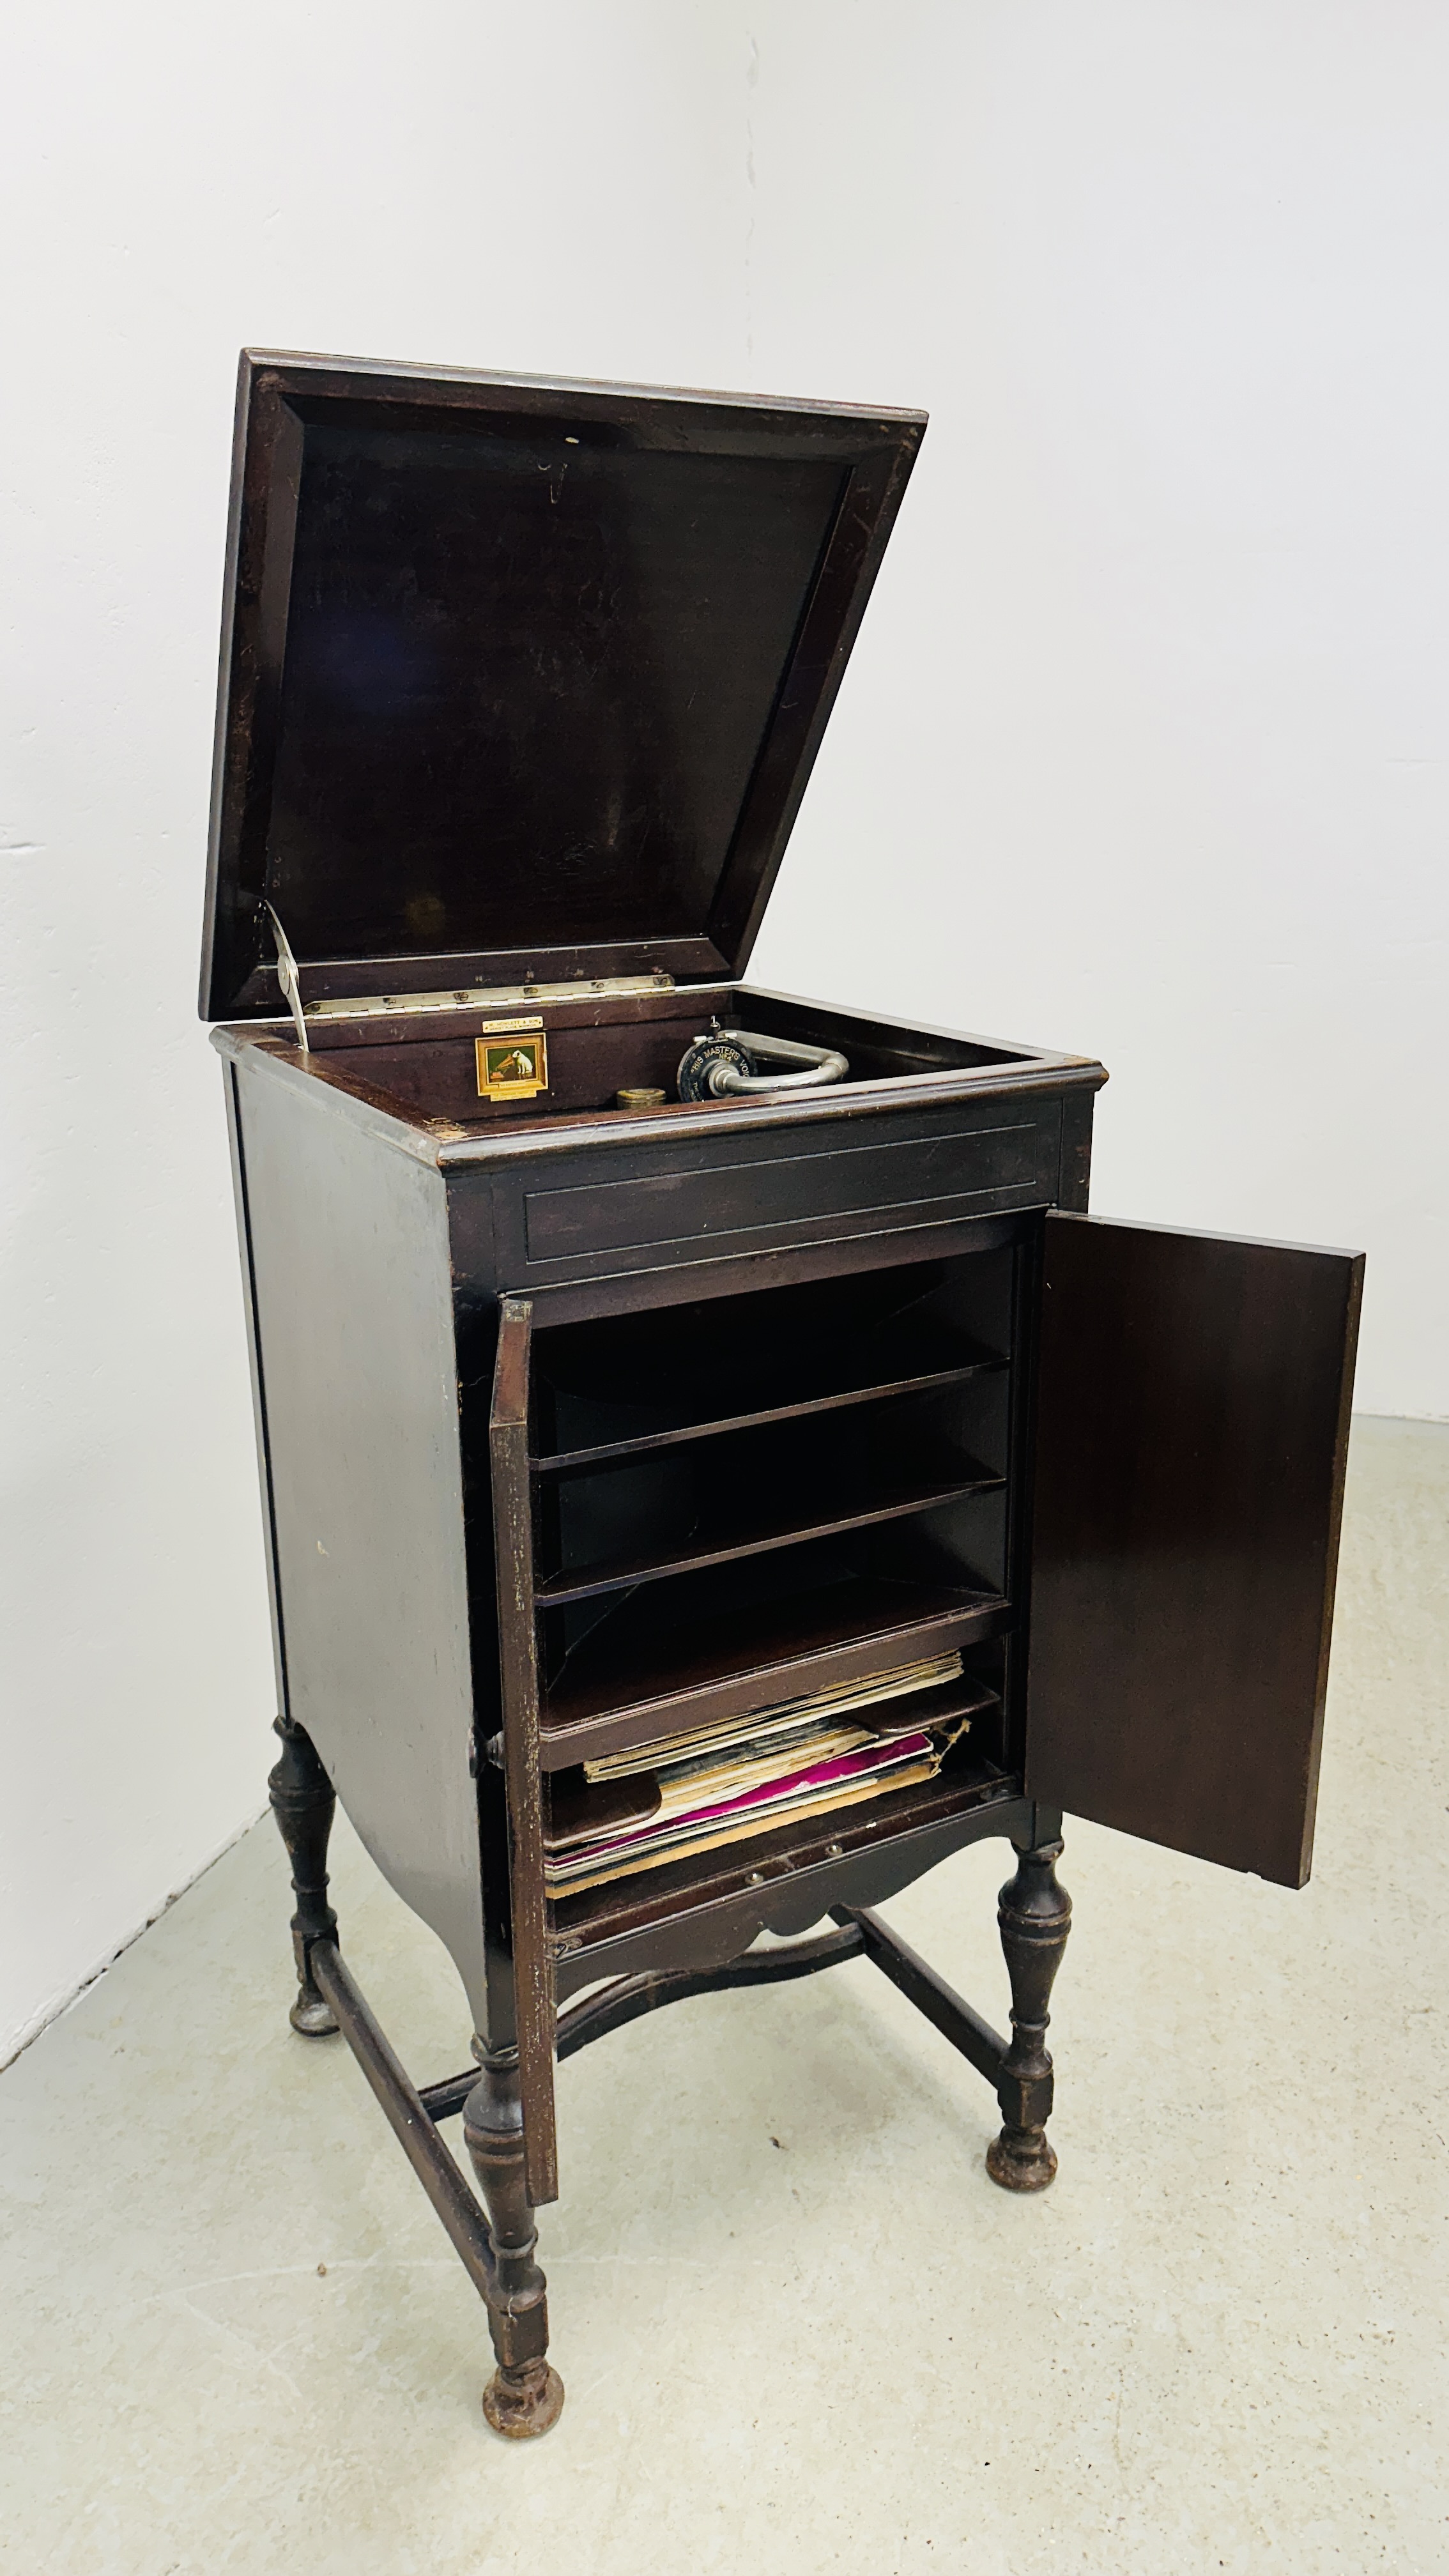 A VINTAGE "HIS MASTERS VOICE" GRAMOPHONE IN A FITTED MAHOGANY FINISH MUSIC CABINET BY W.